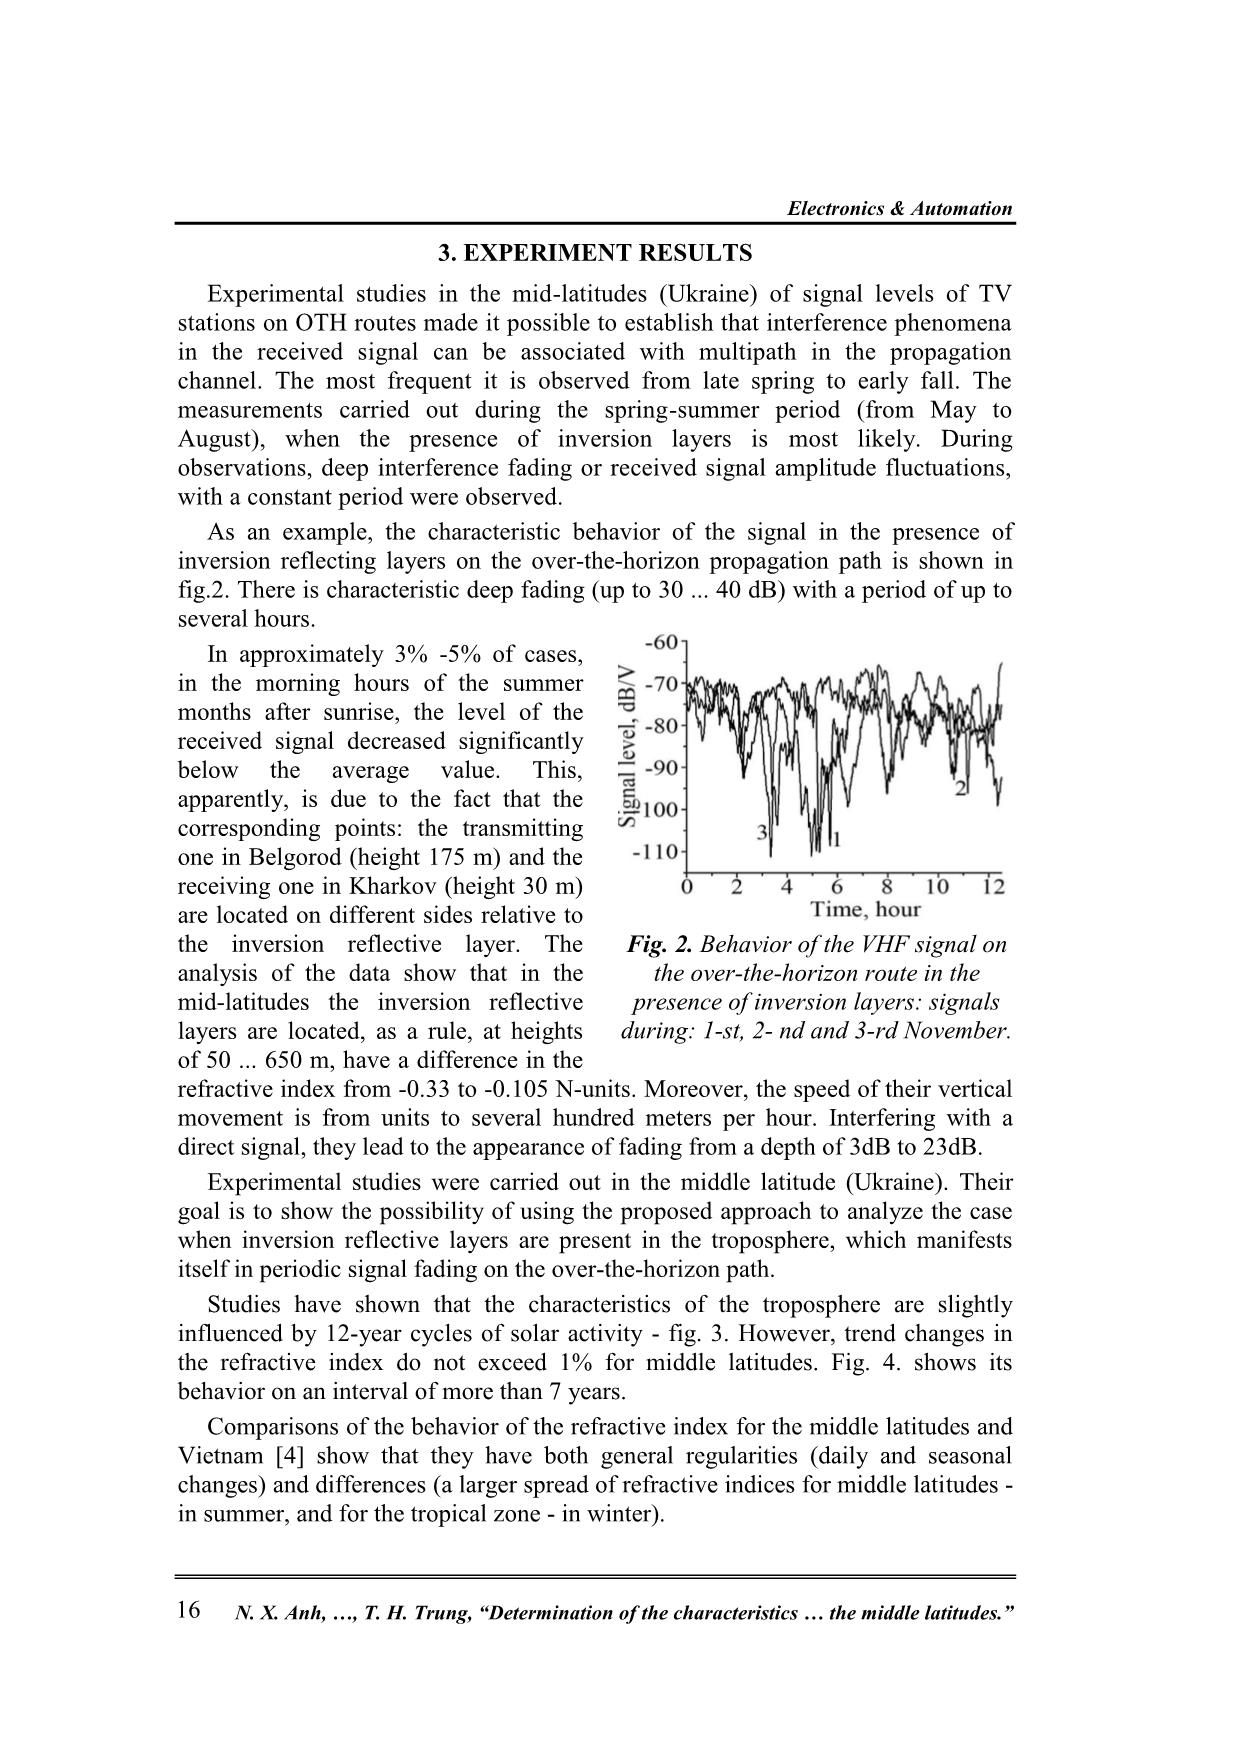 Determination of the characteristics of inversion reflecting layers in the troposphere on changes in the signal intensity on the near-earth over-thehorizon routes in the middle latitudes trang 4